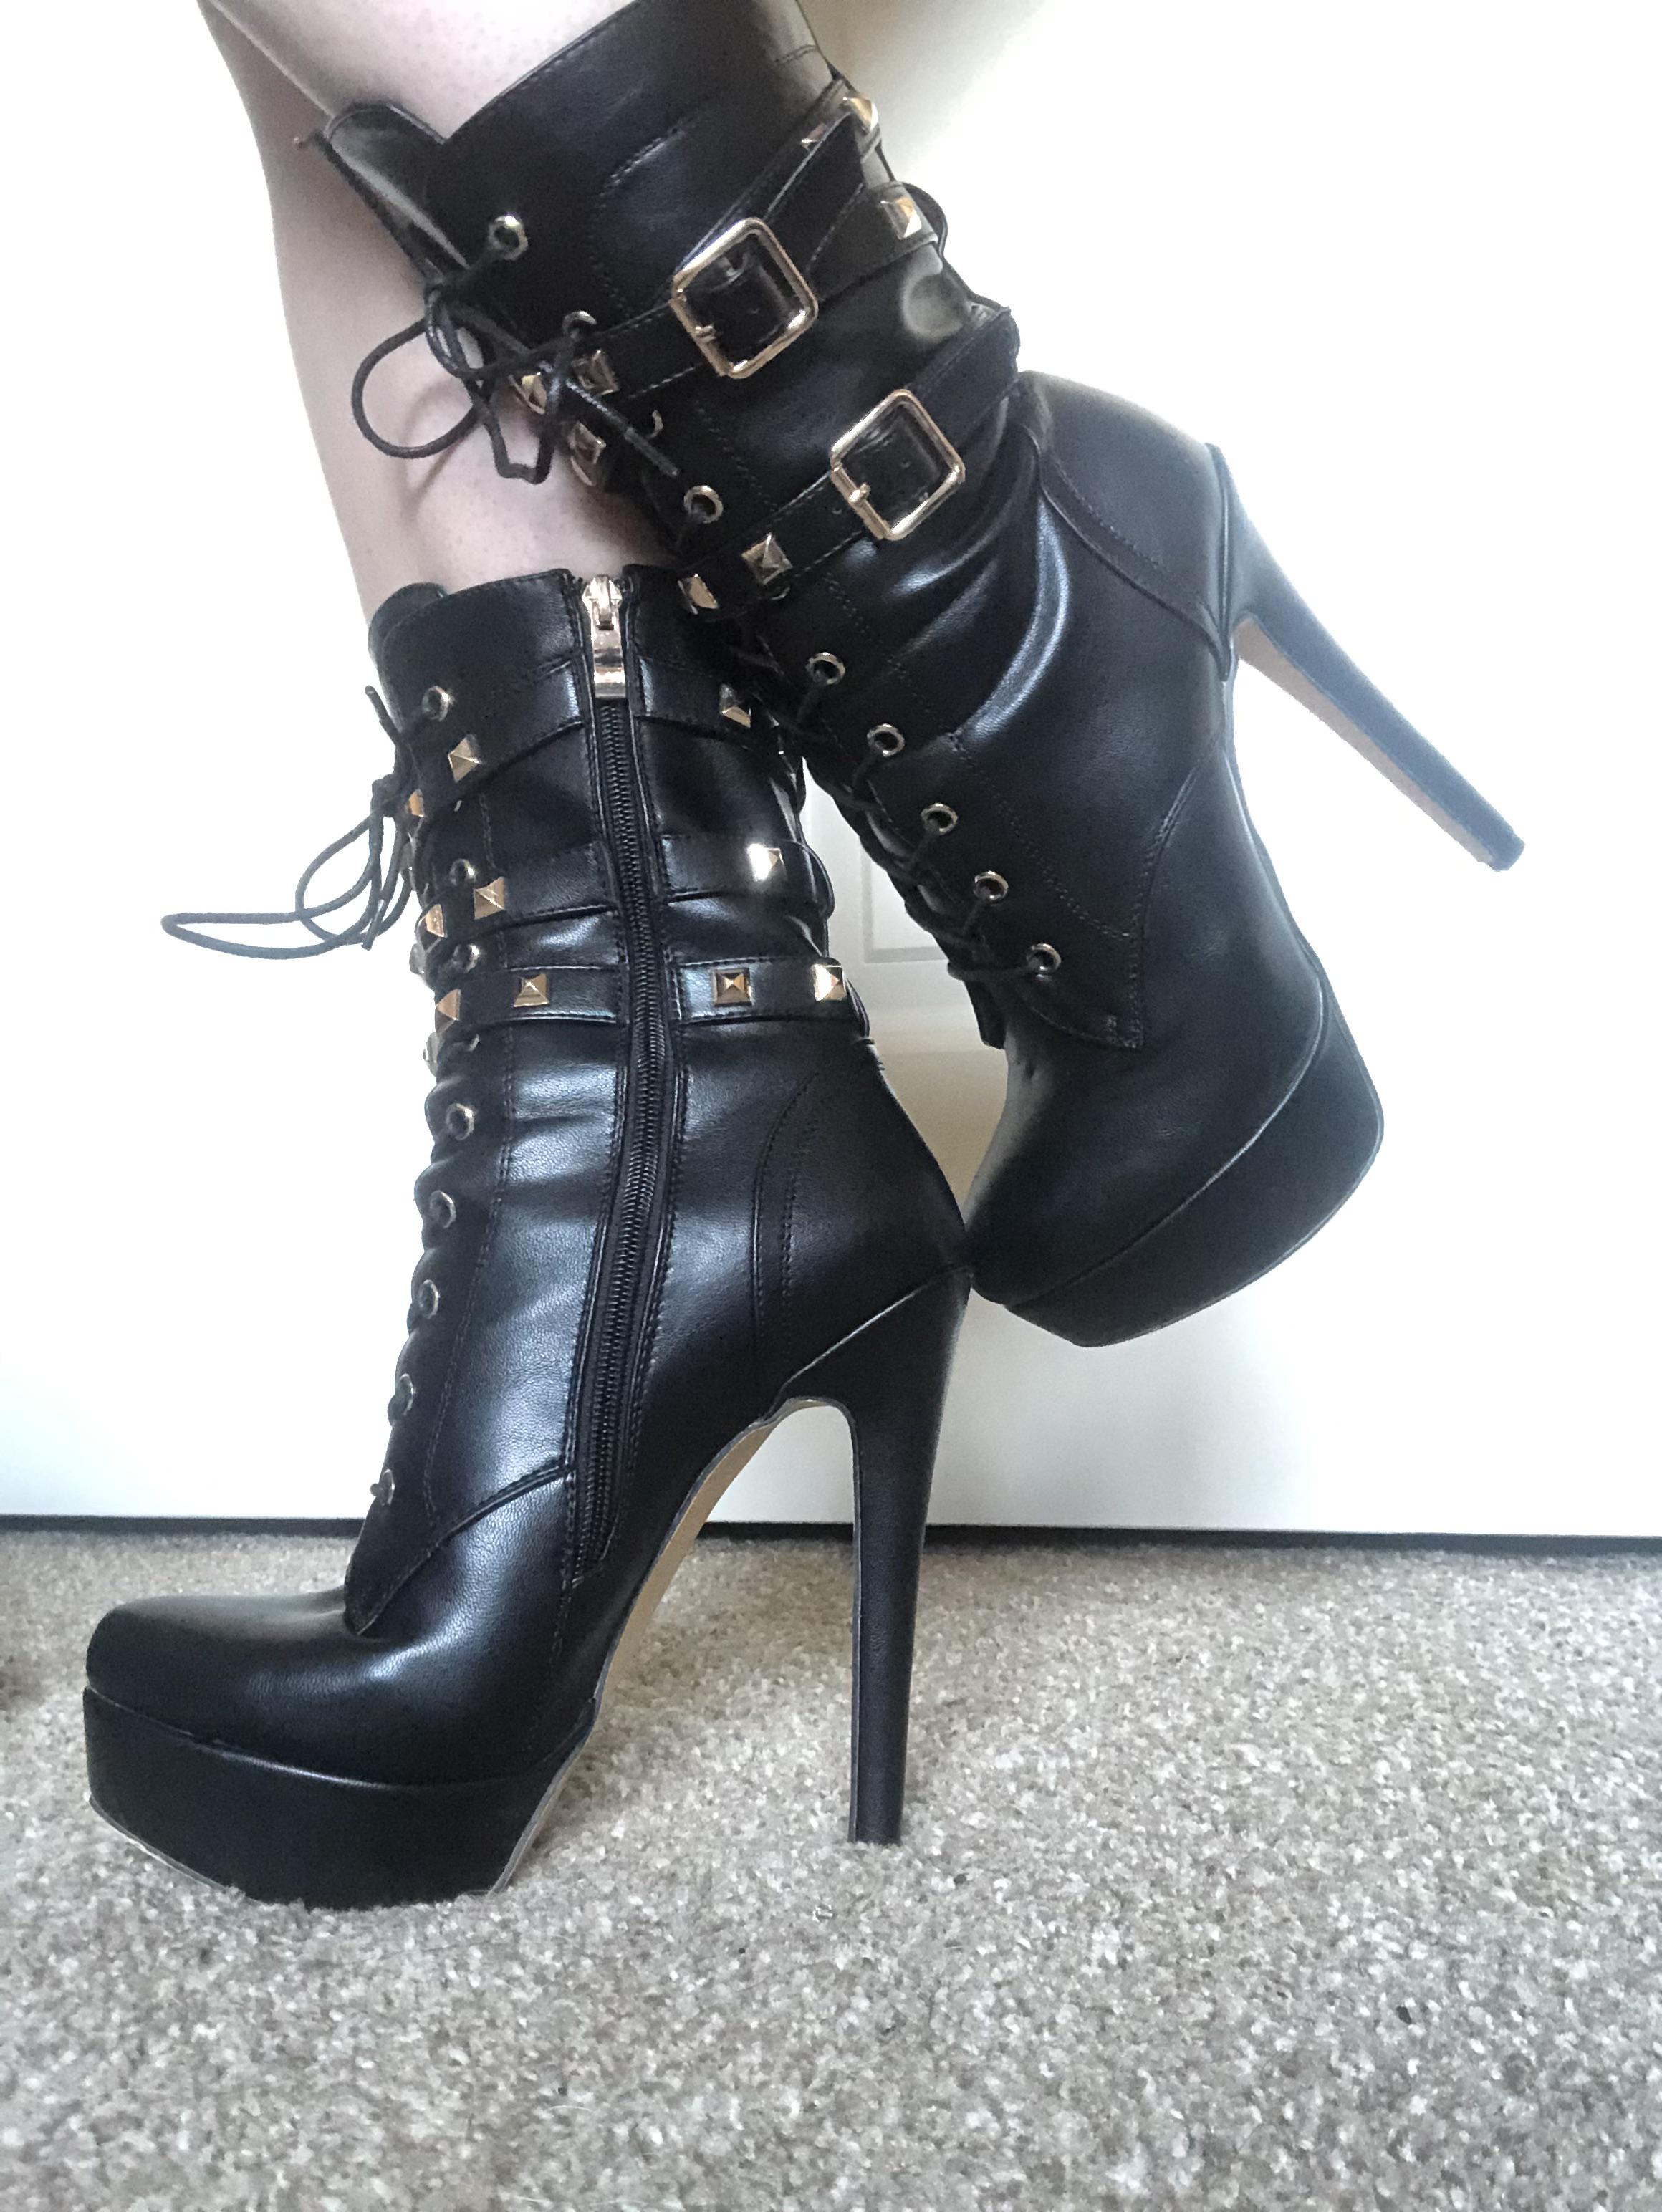 You want to be trampled underneath my boots, and beg to lick the soles ...